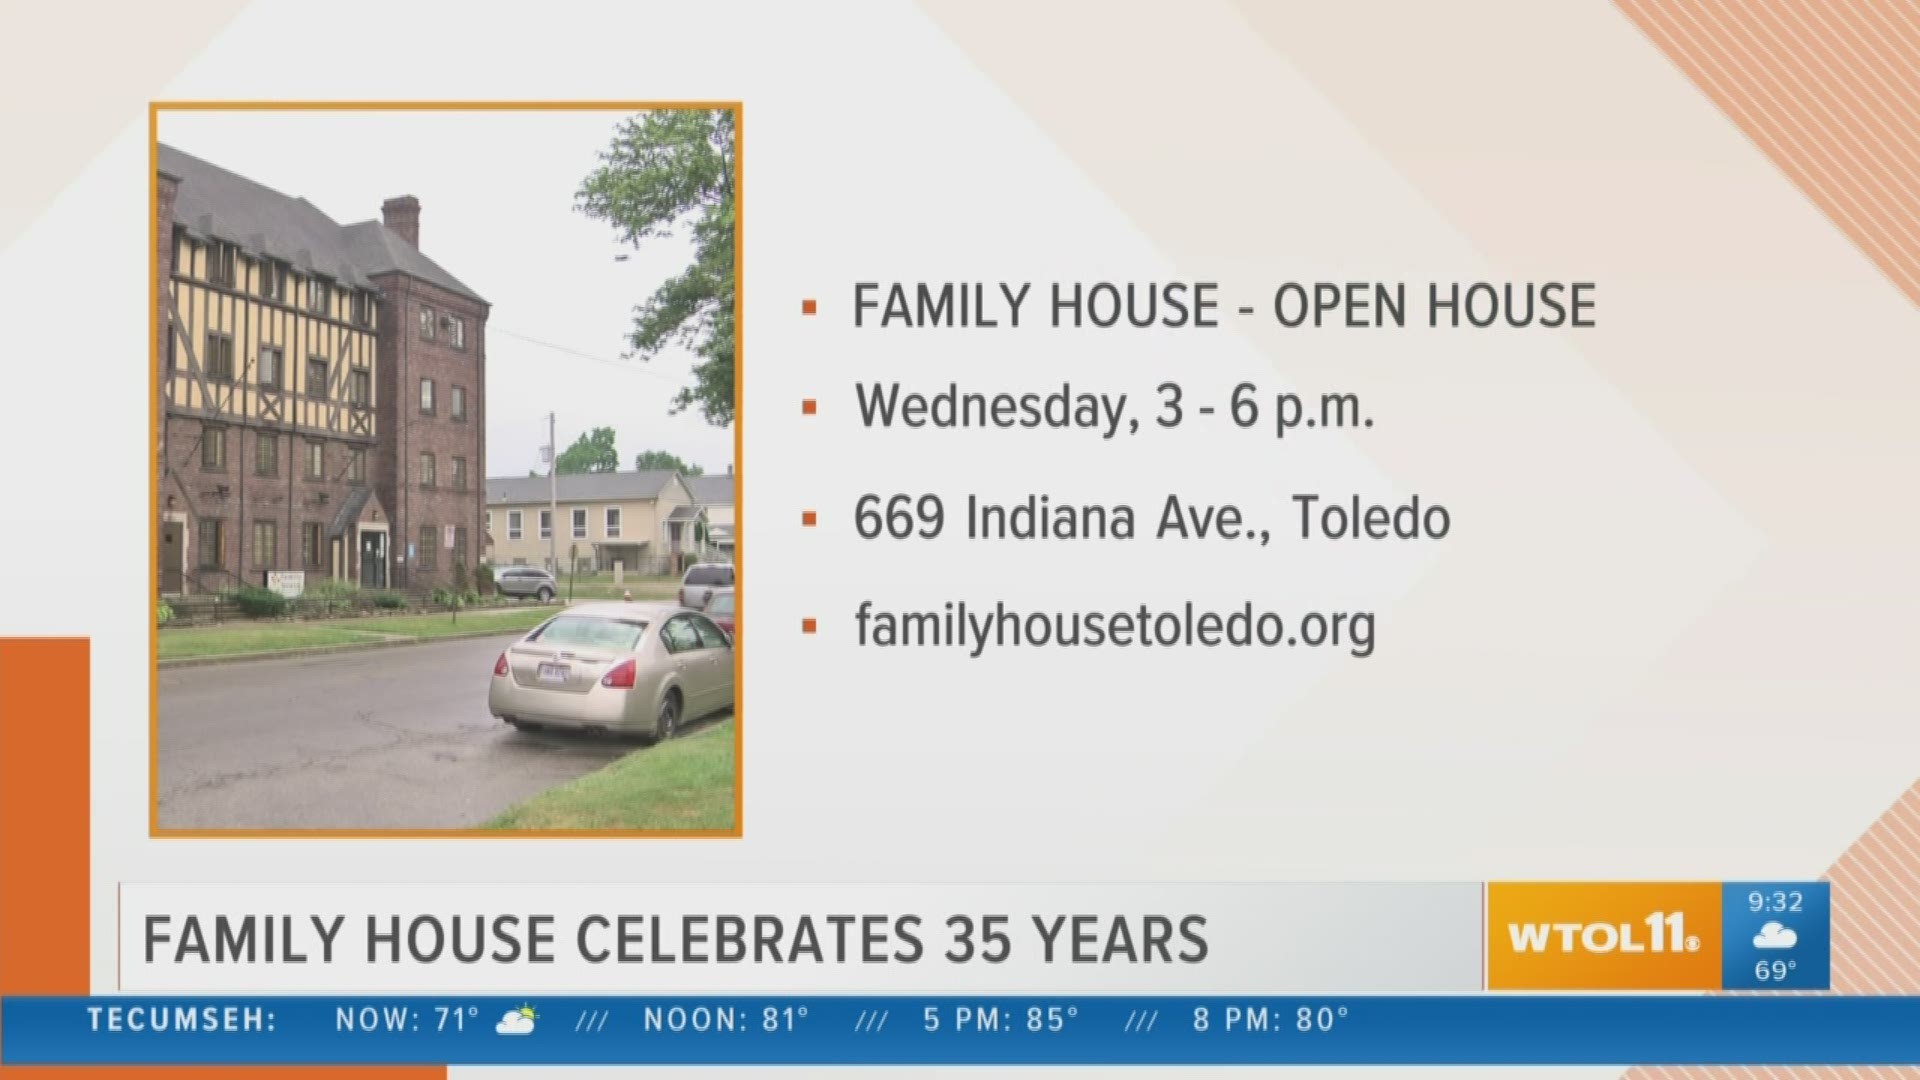 Family House celebrates 35 years with an open house this Wednesday!